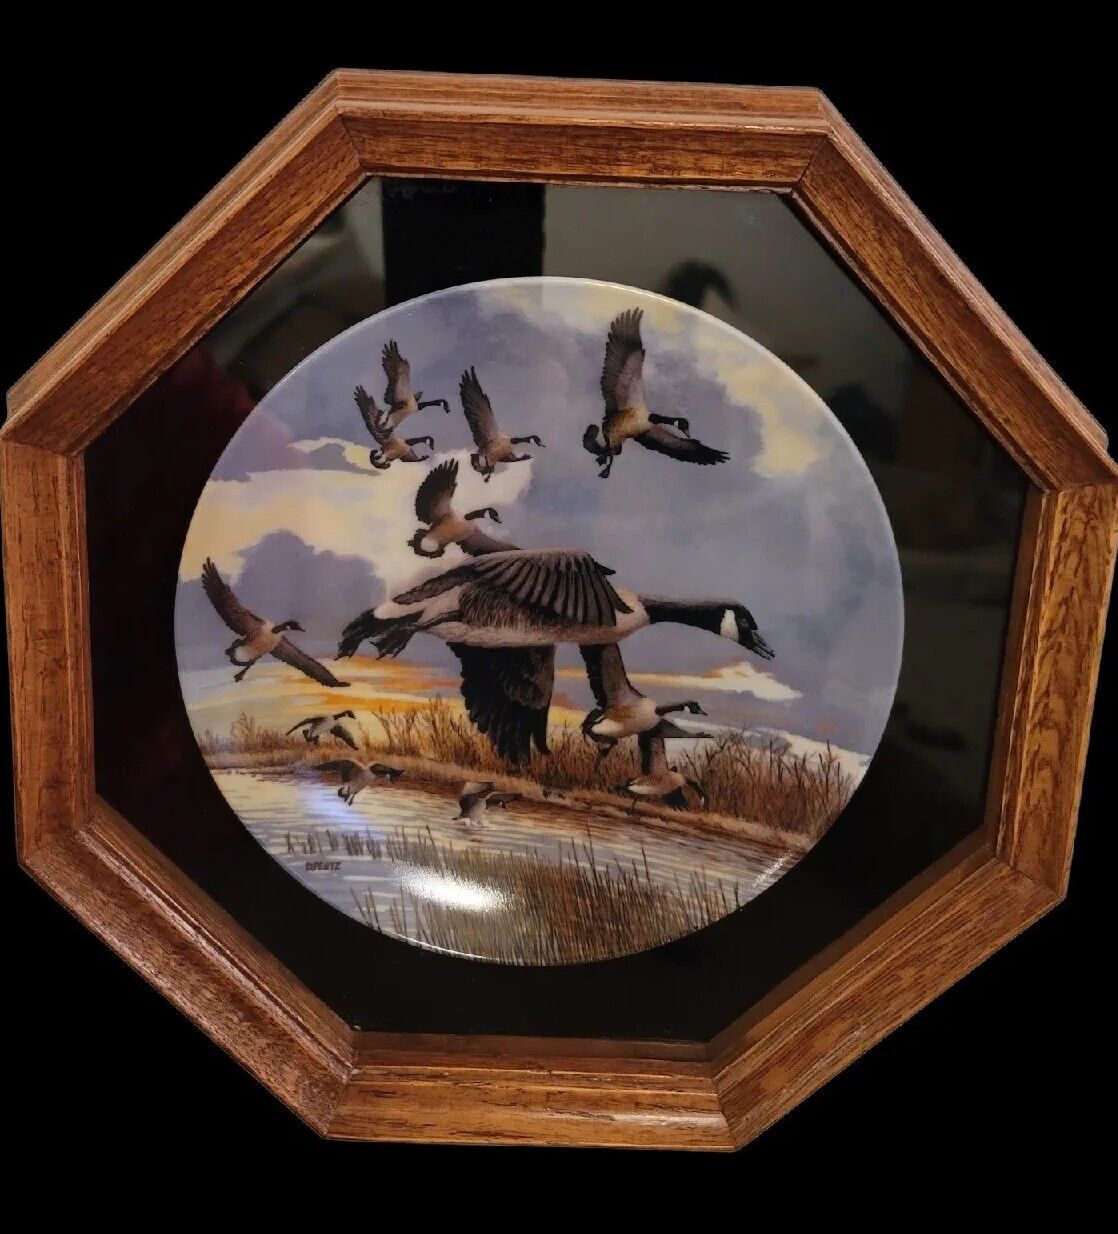 The Landing Donald Pentz Limited Edition Dominion Framed Porcelain Plate Nice